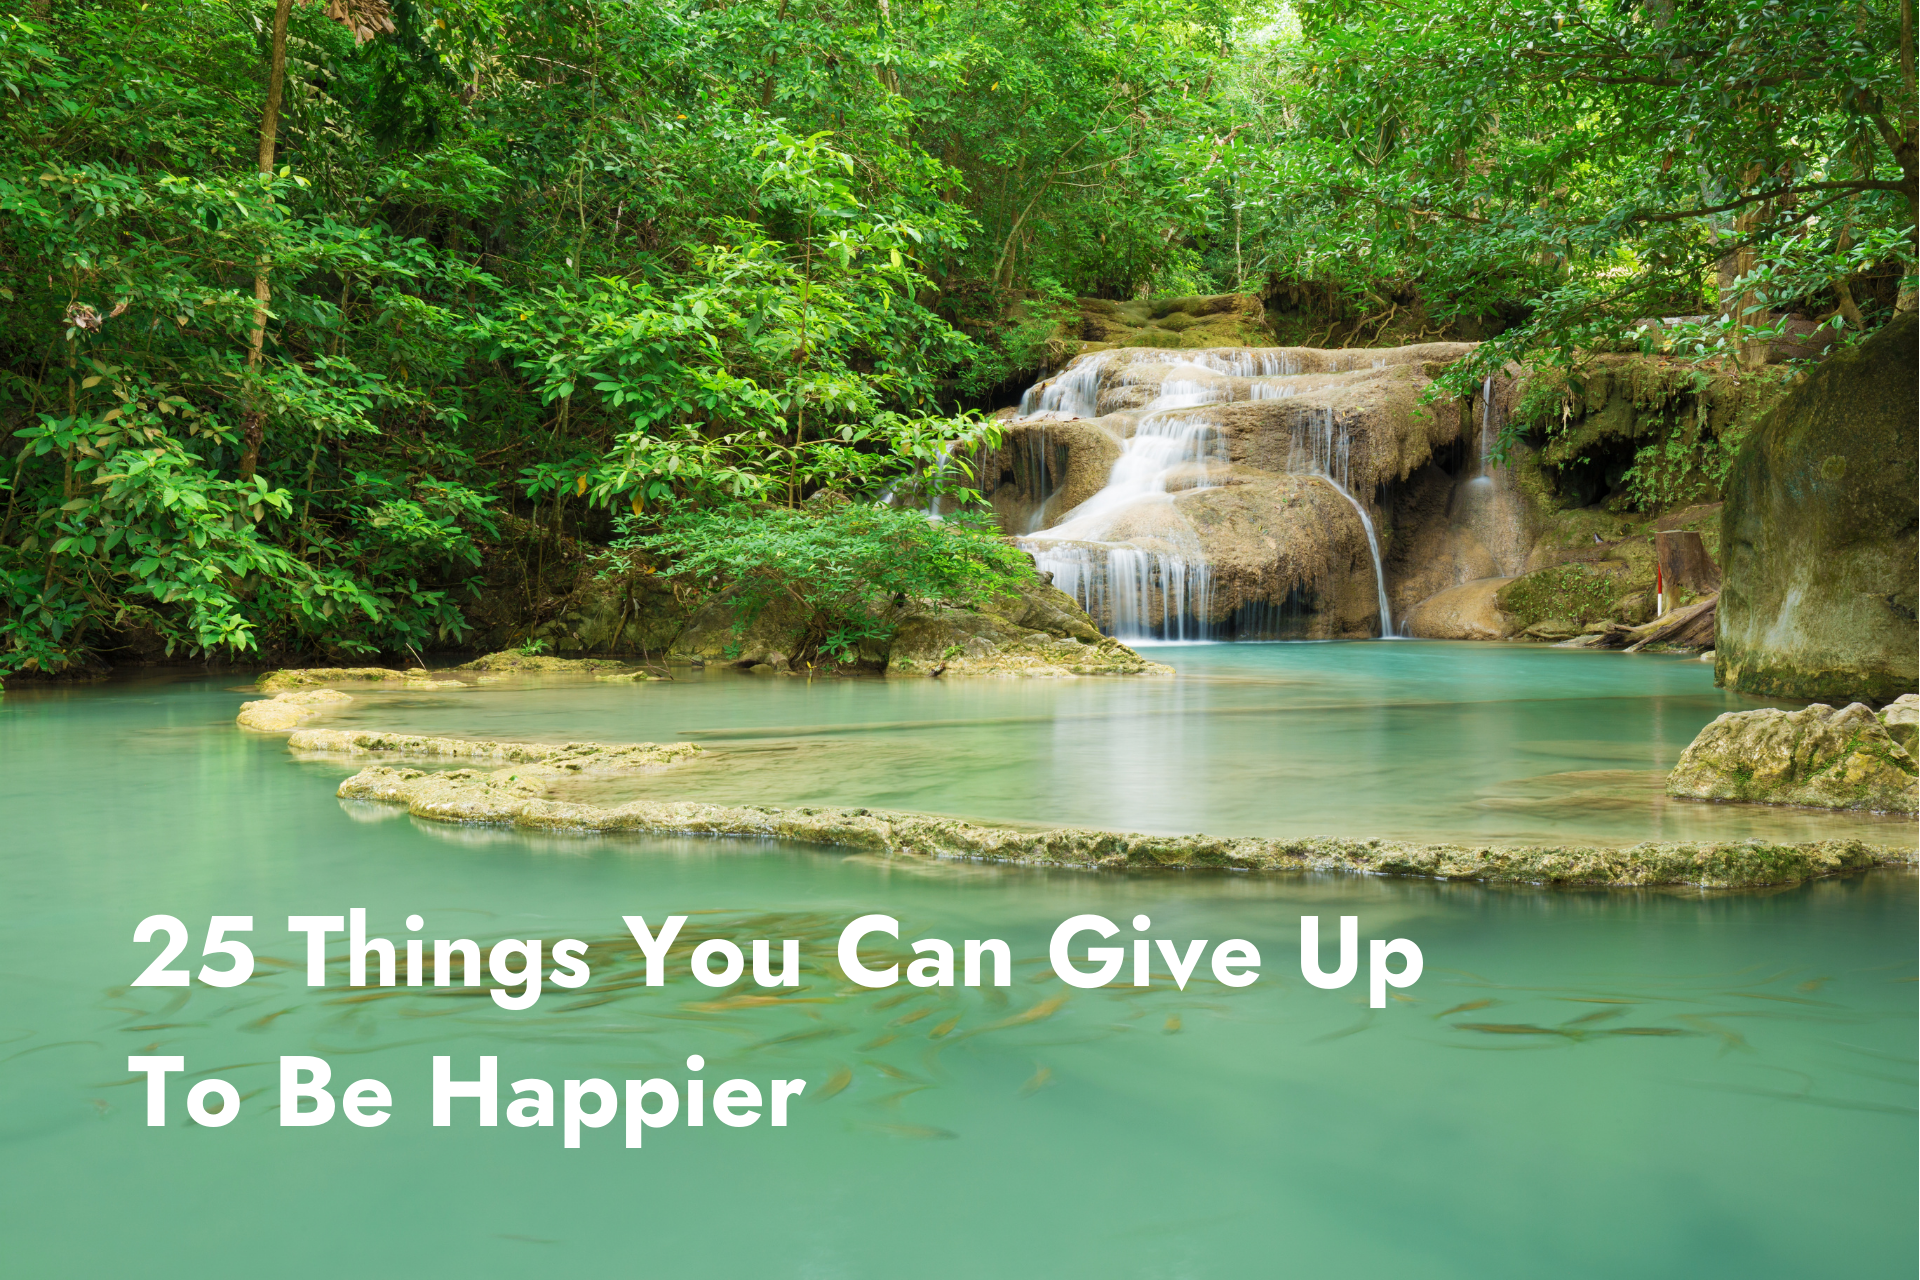 25 Things You Can Give Up To Be Happier